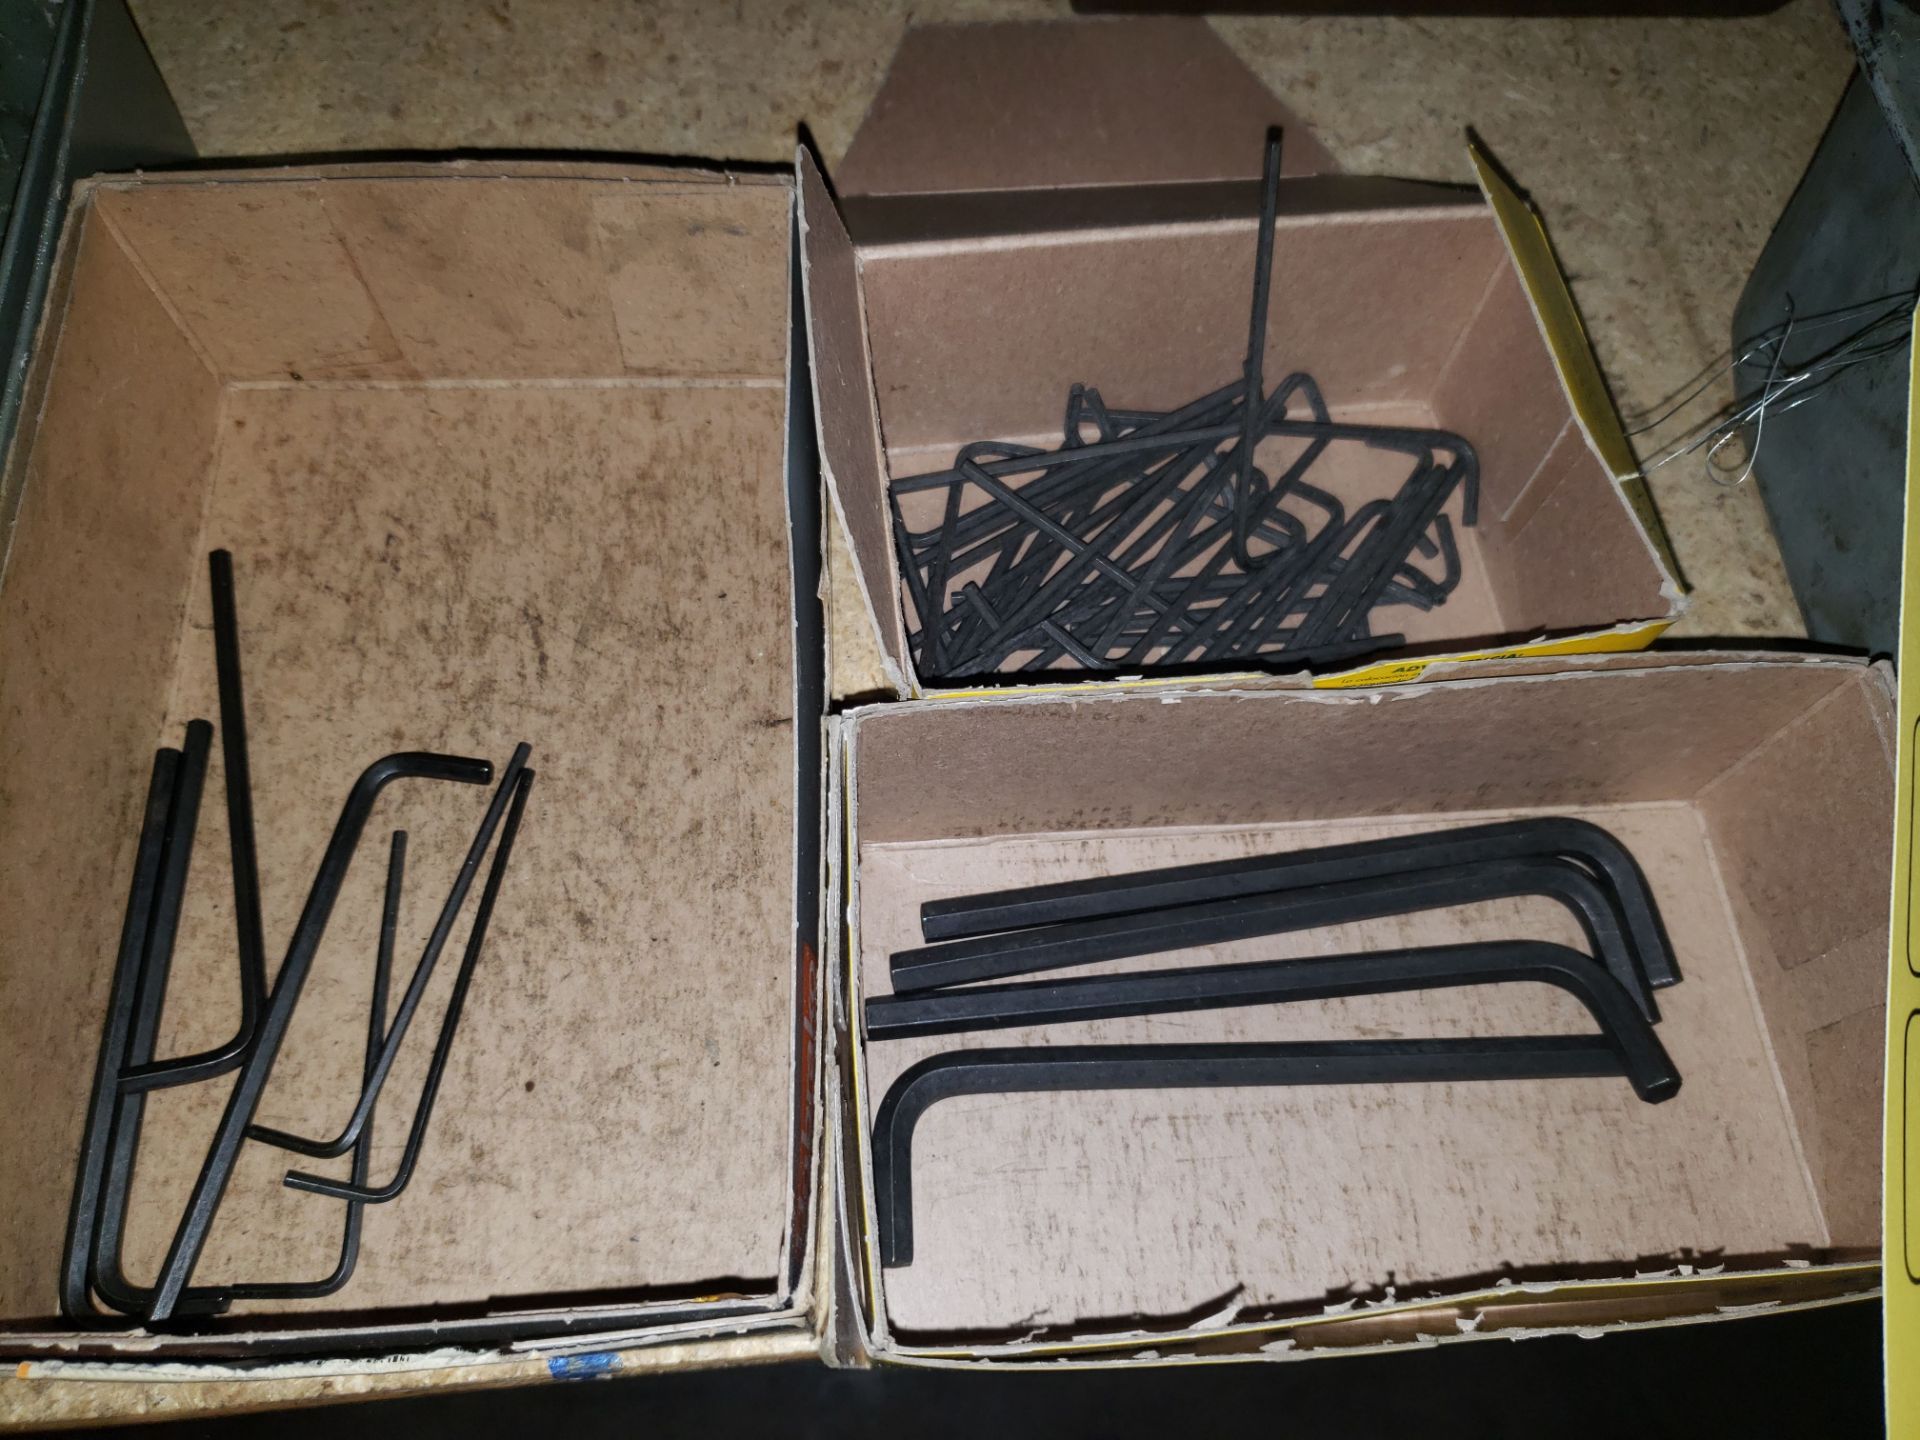 LARGE QUANTITY OF ALLEN WRENCHES - Image 3 of 4